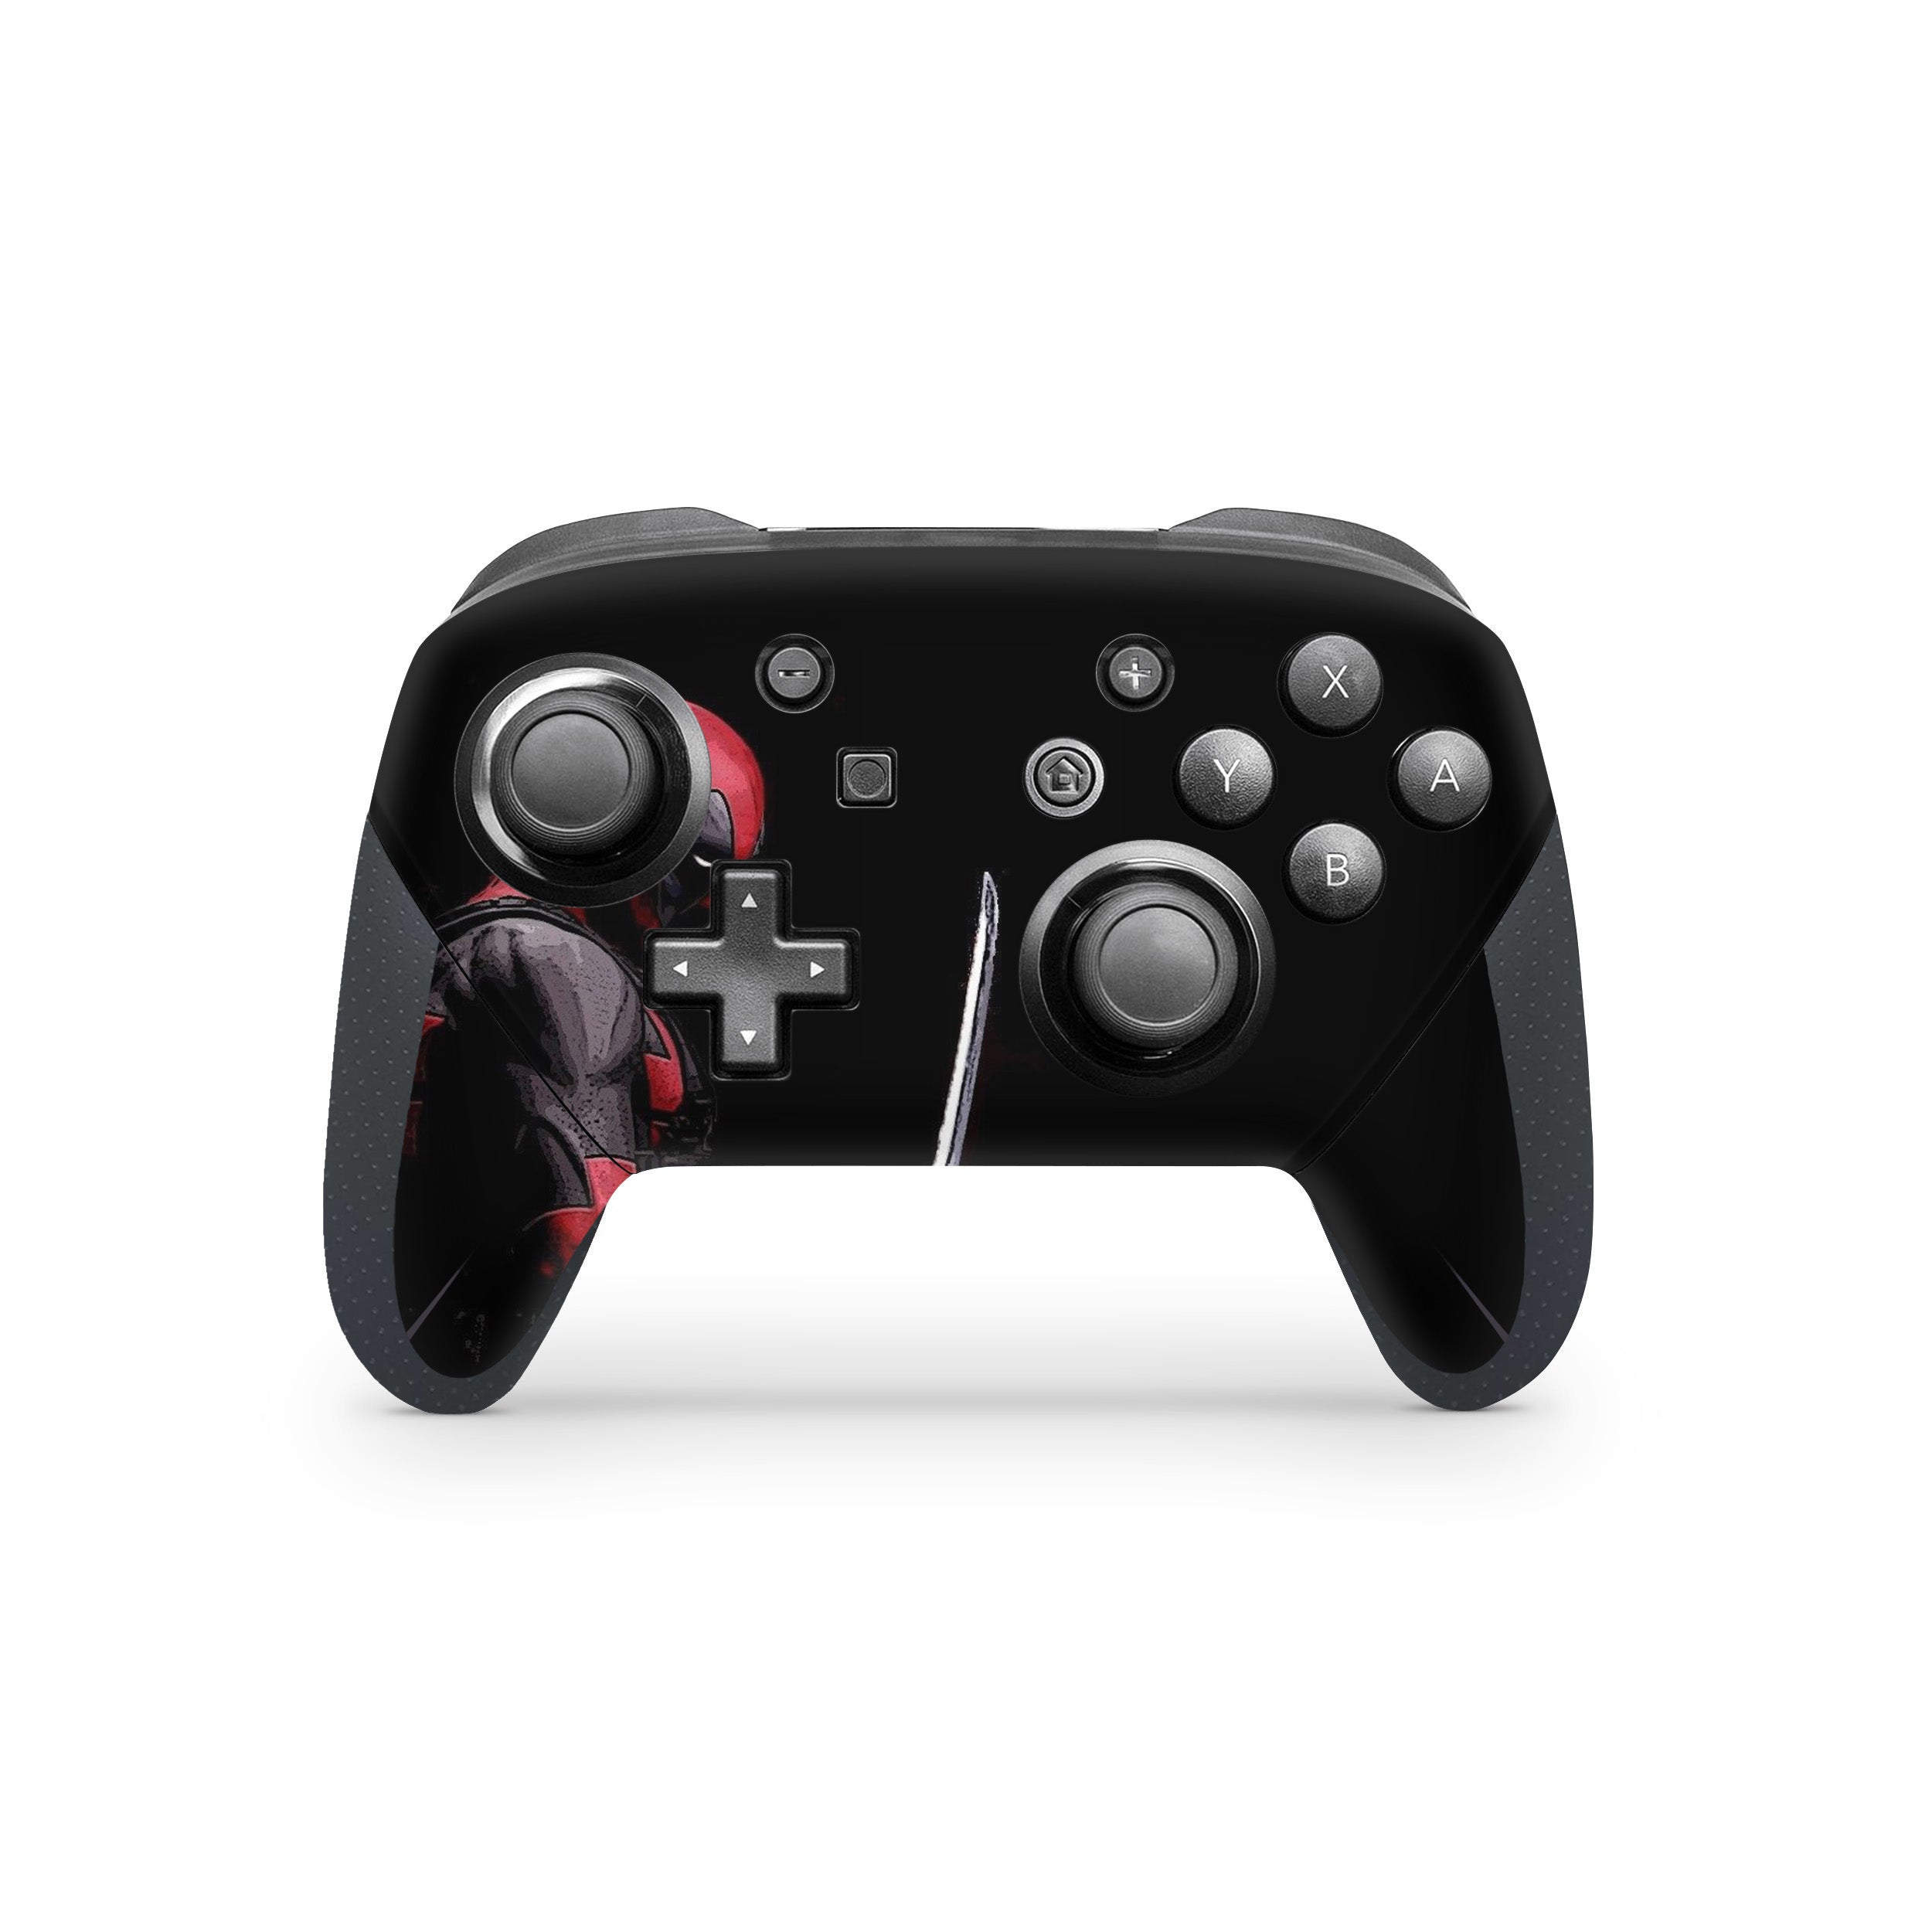 A video game skin featuring a Marvel Dead Pool design for the Switch Pro Controller.